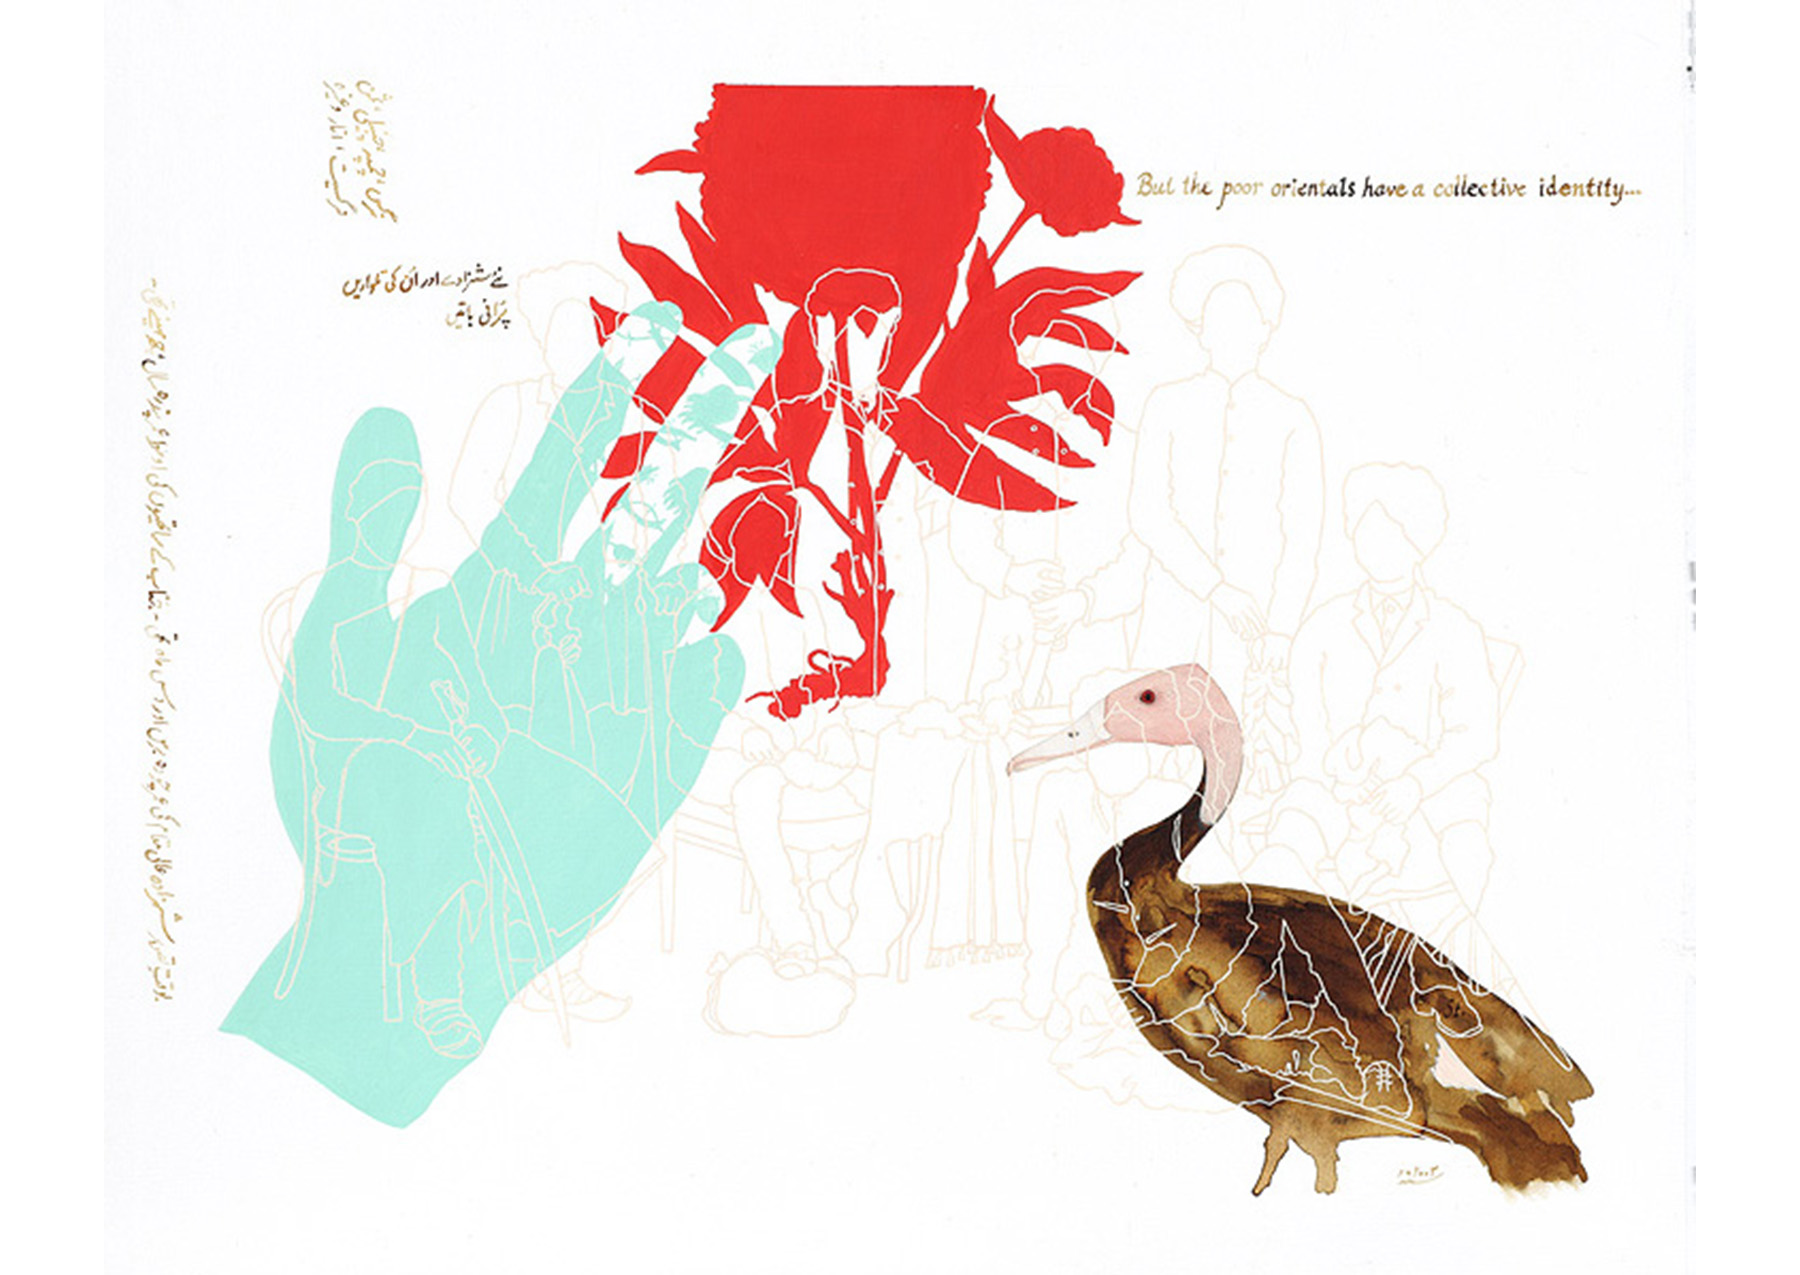 large light green hand at left with large red flower, bird at lower right, line drawing of eight seated and standing figures overlaying larger elements, text in Urdu at left and in English at top right